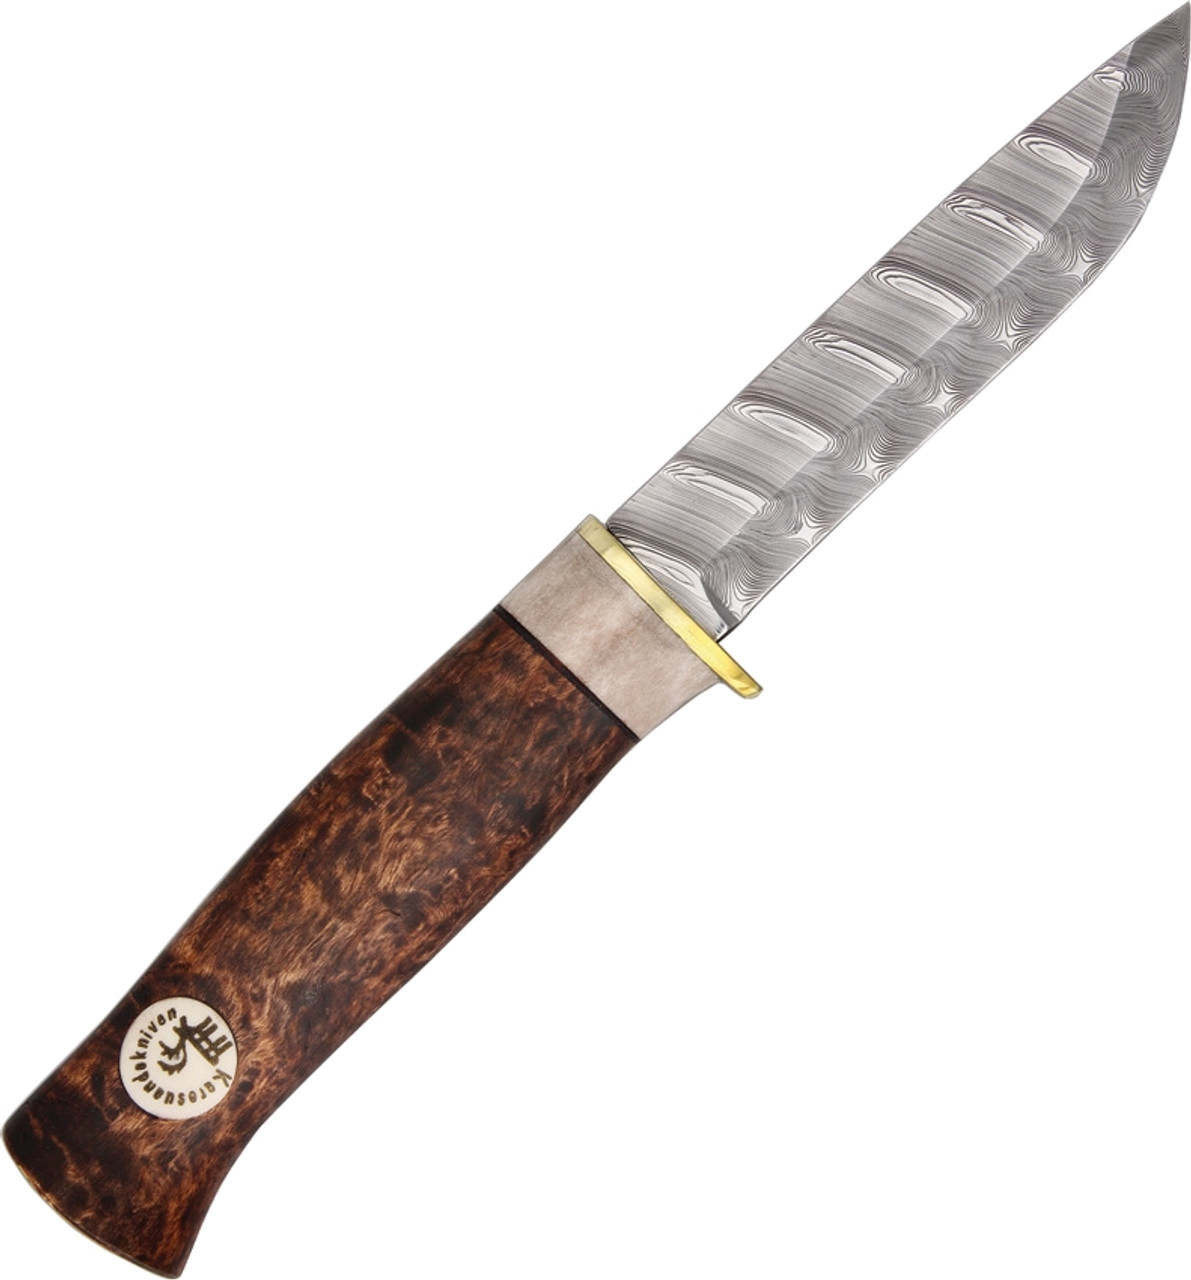 Karesuando-Kniven Northern Lights Stainless Steel Hunting Knife product image